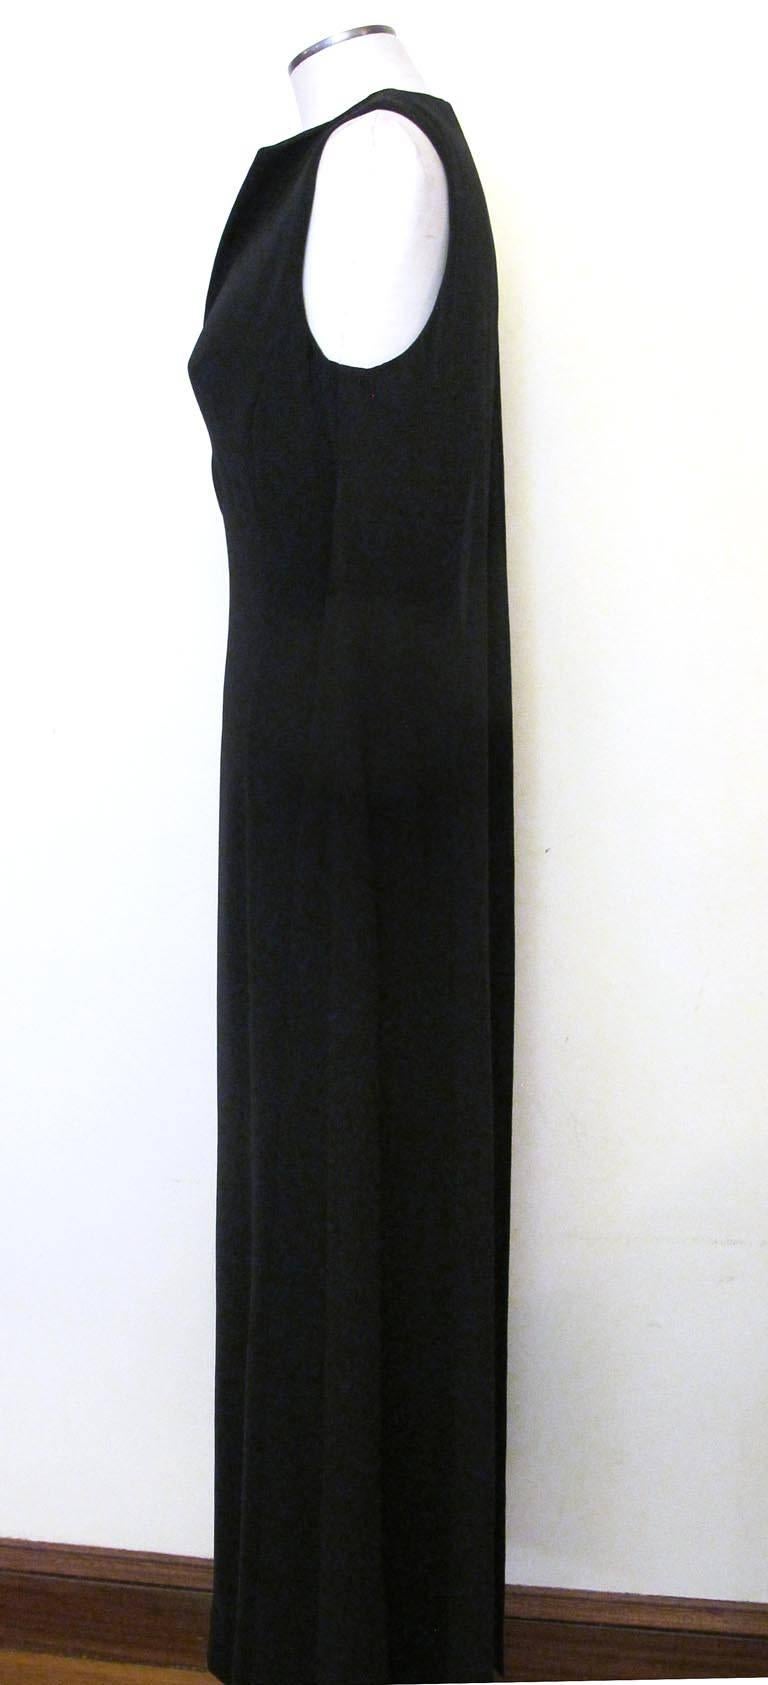 Paco Rabanne 1990s Sleeveless Black Evening Gown with Sheer Panels In Excellent Condition For Sale In San Francisco, CA